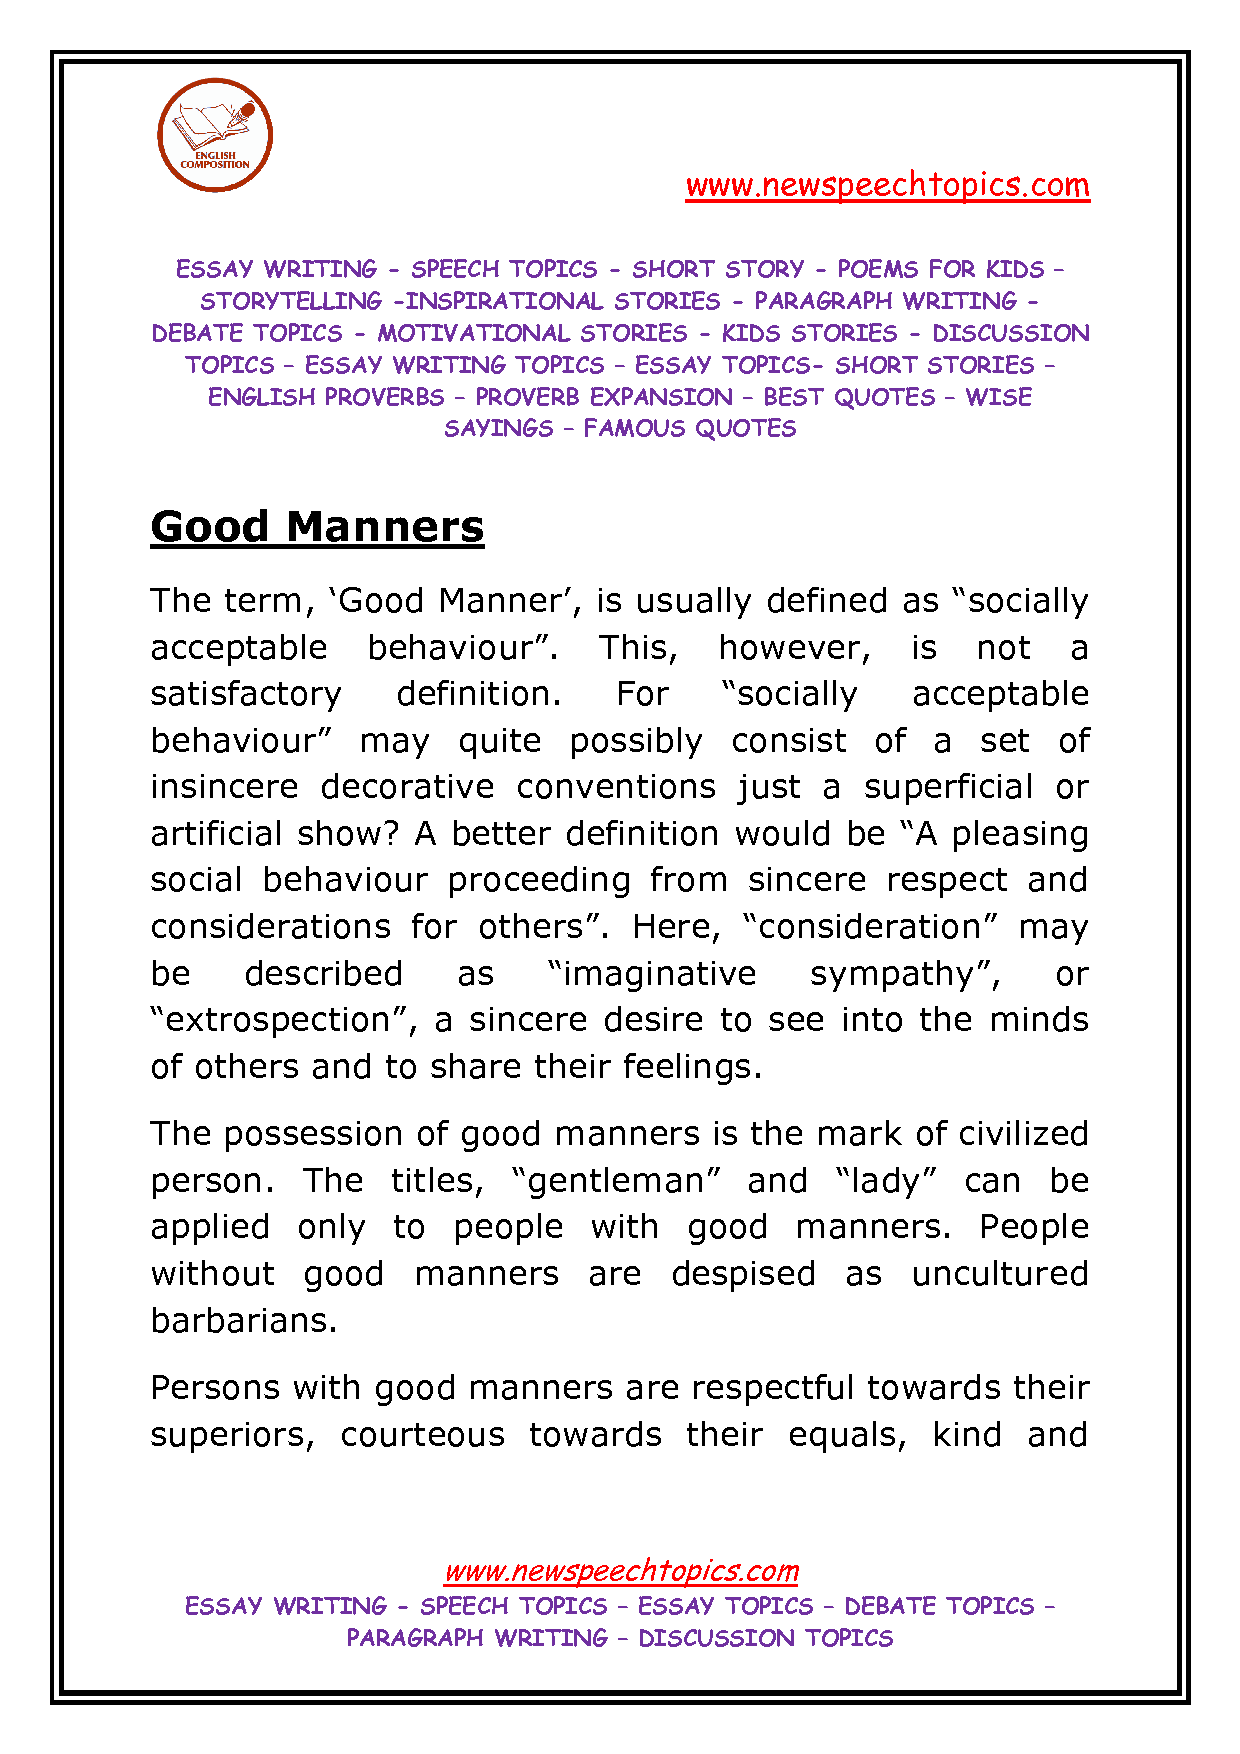 Essay on manners